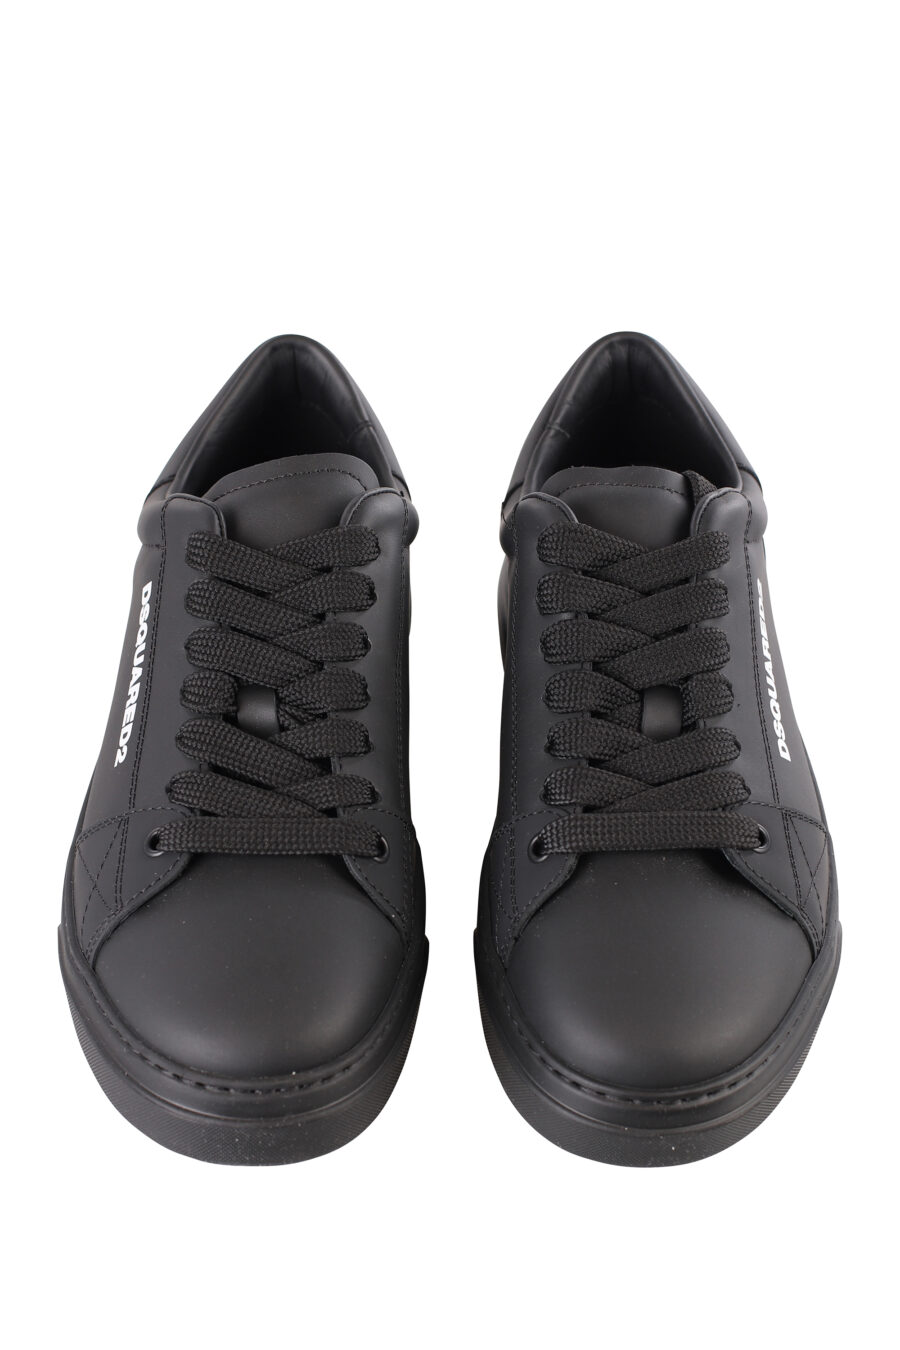 Black trainers with small white logo and black sole - IMG 1133